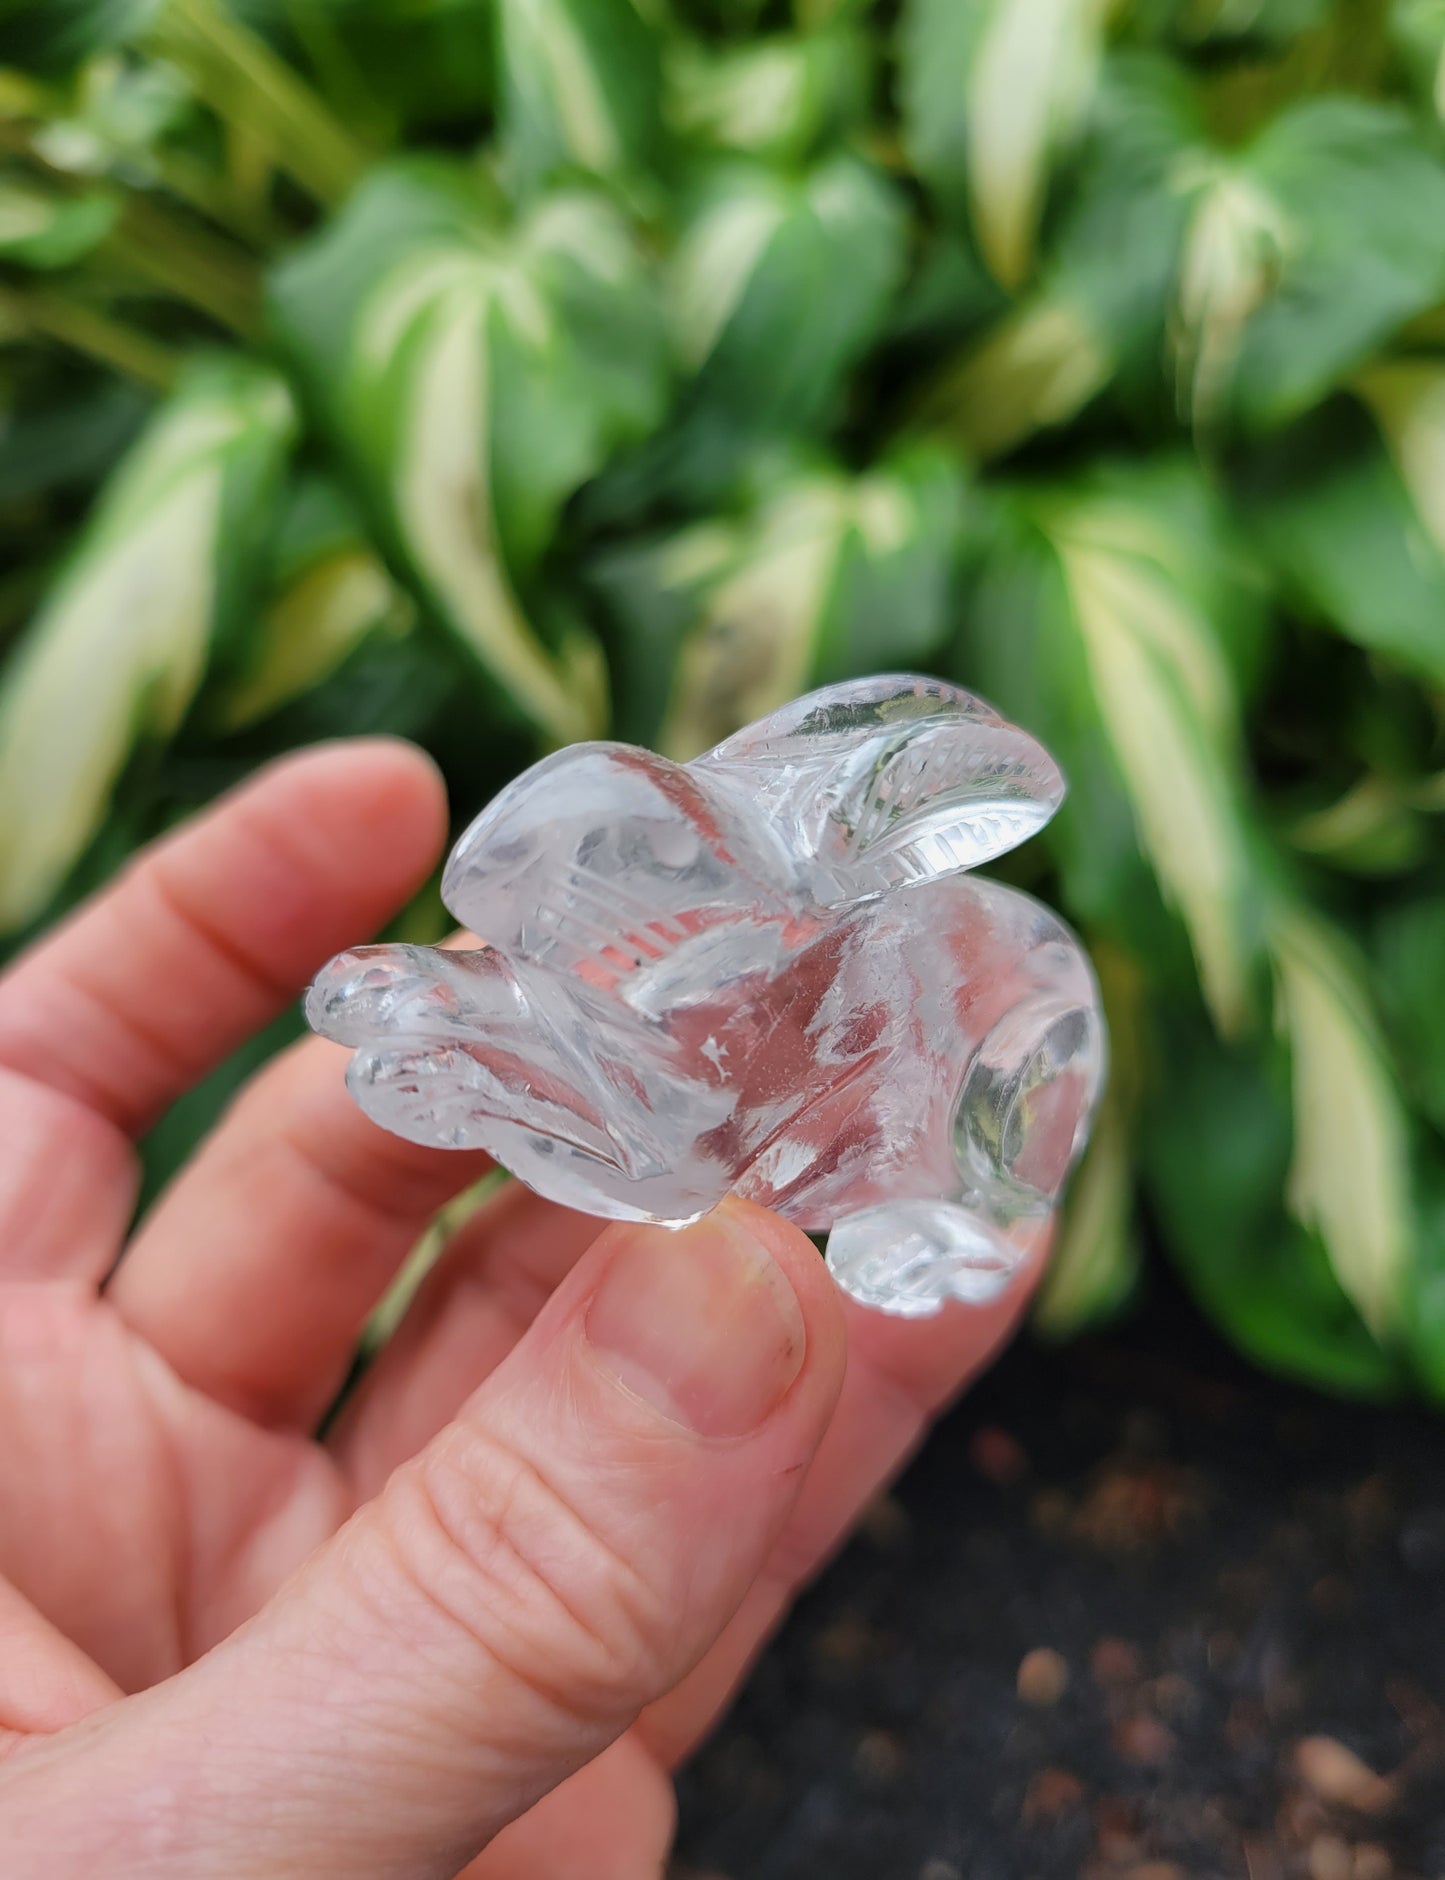 Himalayan Quartz Rabbit, Carved and Polished in India (W 1 1/8 X L 2 3/8 X H 1 3/8 inches, 65 grams)